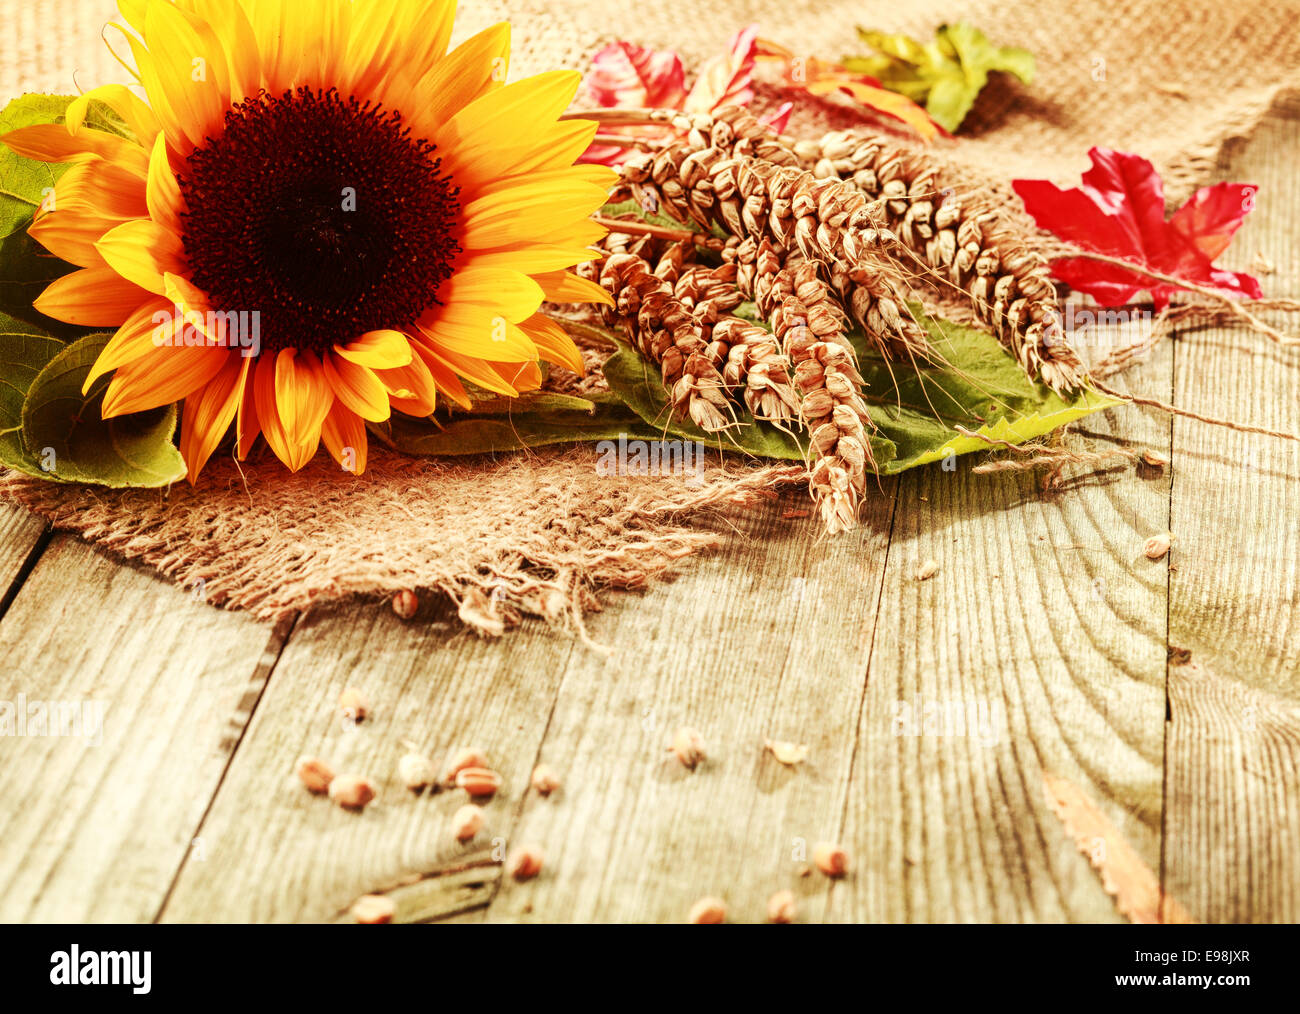 Summer or fall background with a vivid yellow fresh sunflower and freshly harvested ripe ears of wheat on a square of hessian fabric on rustic wooden boards with copyspace Stock Photo